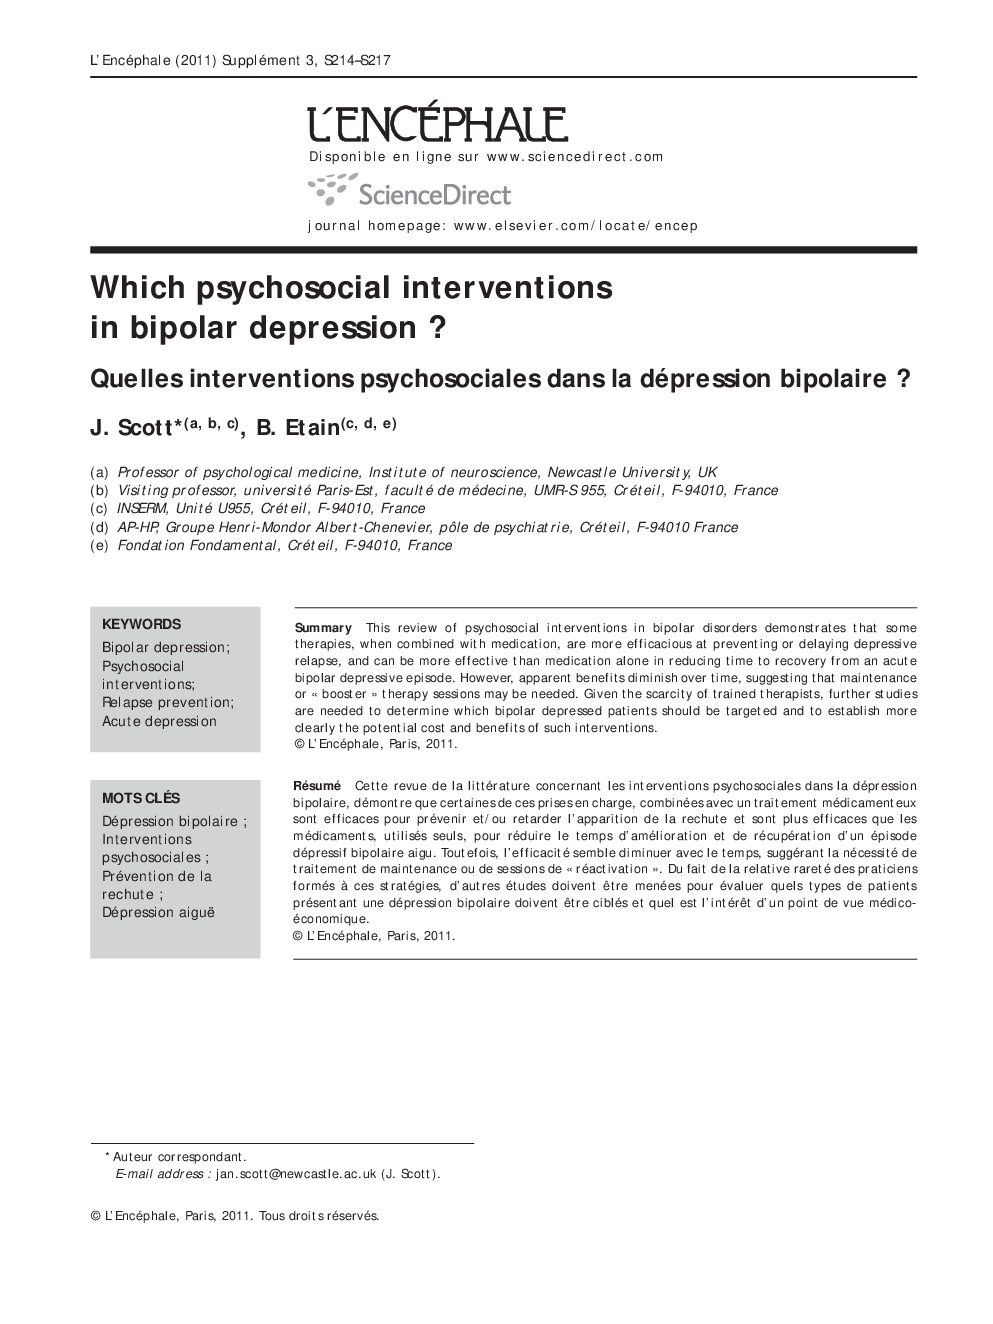 Which psychosocial interventions in bipolar depression ?